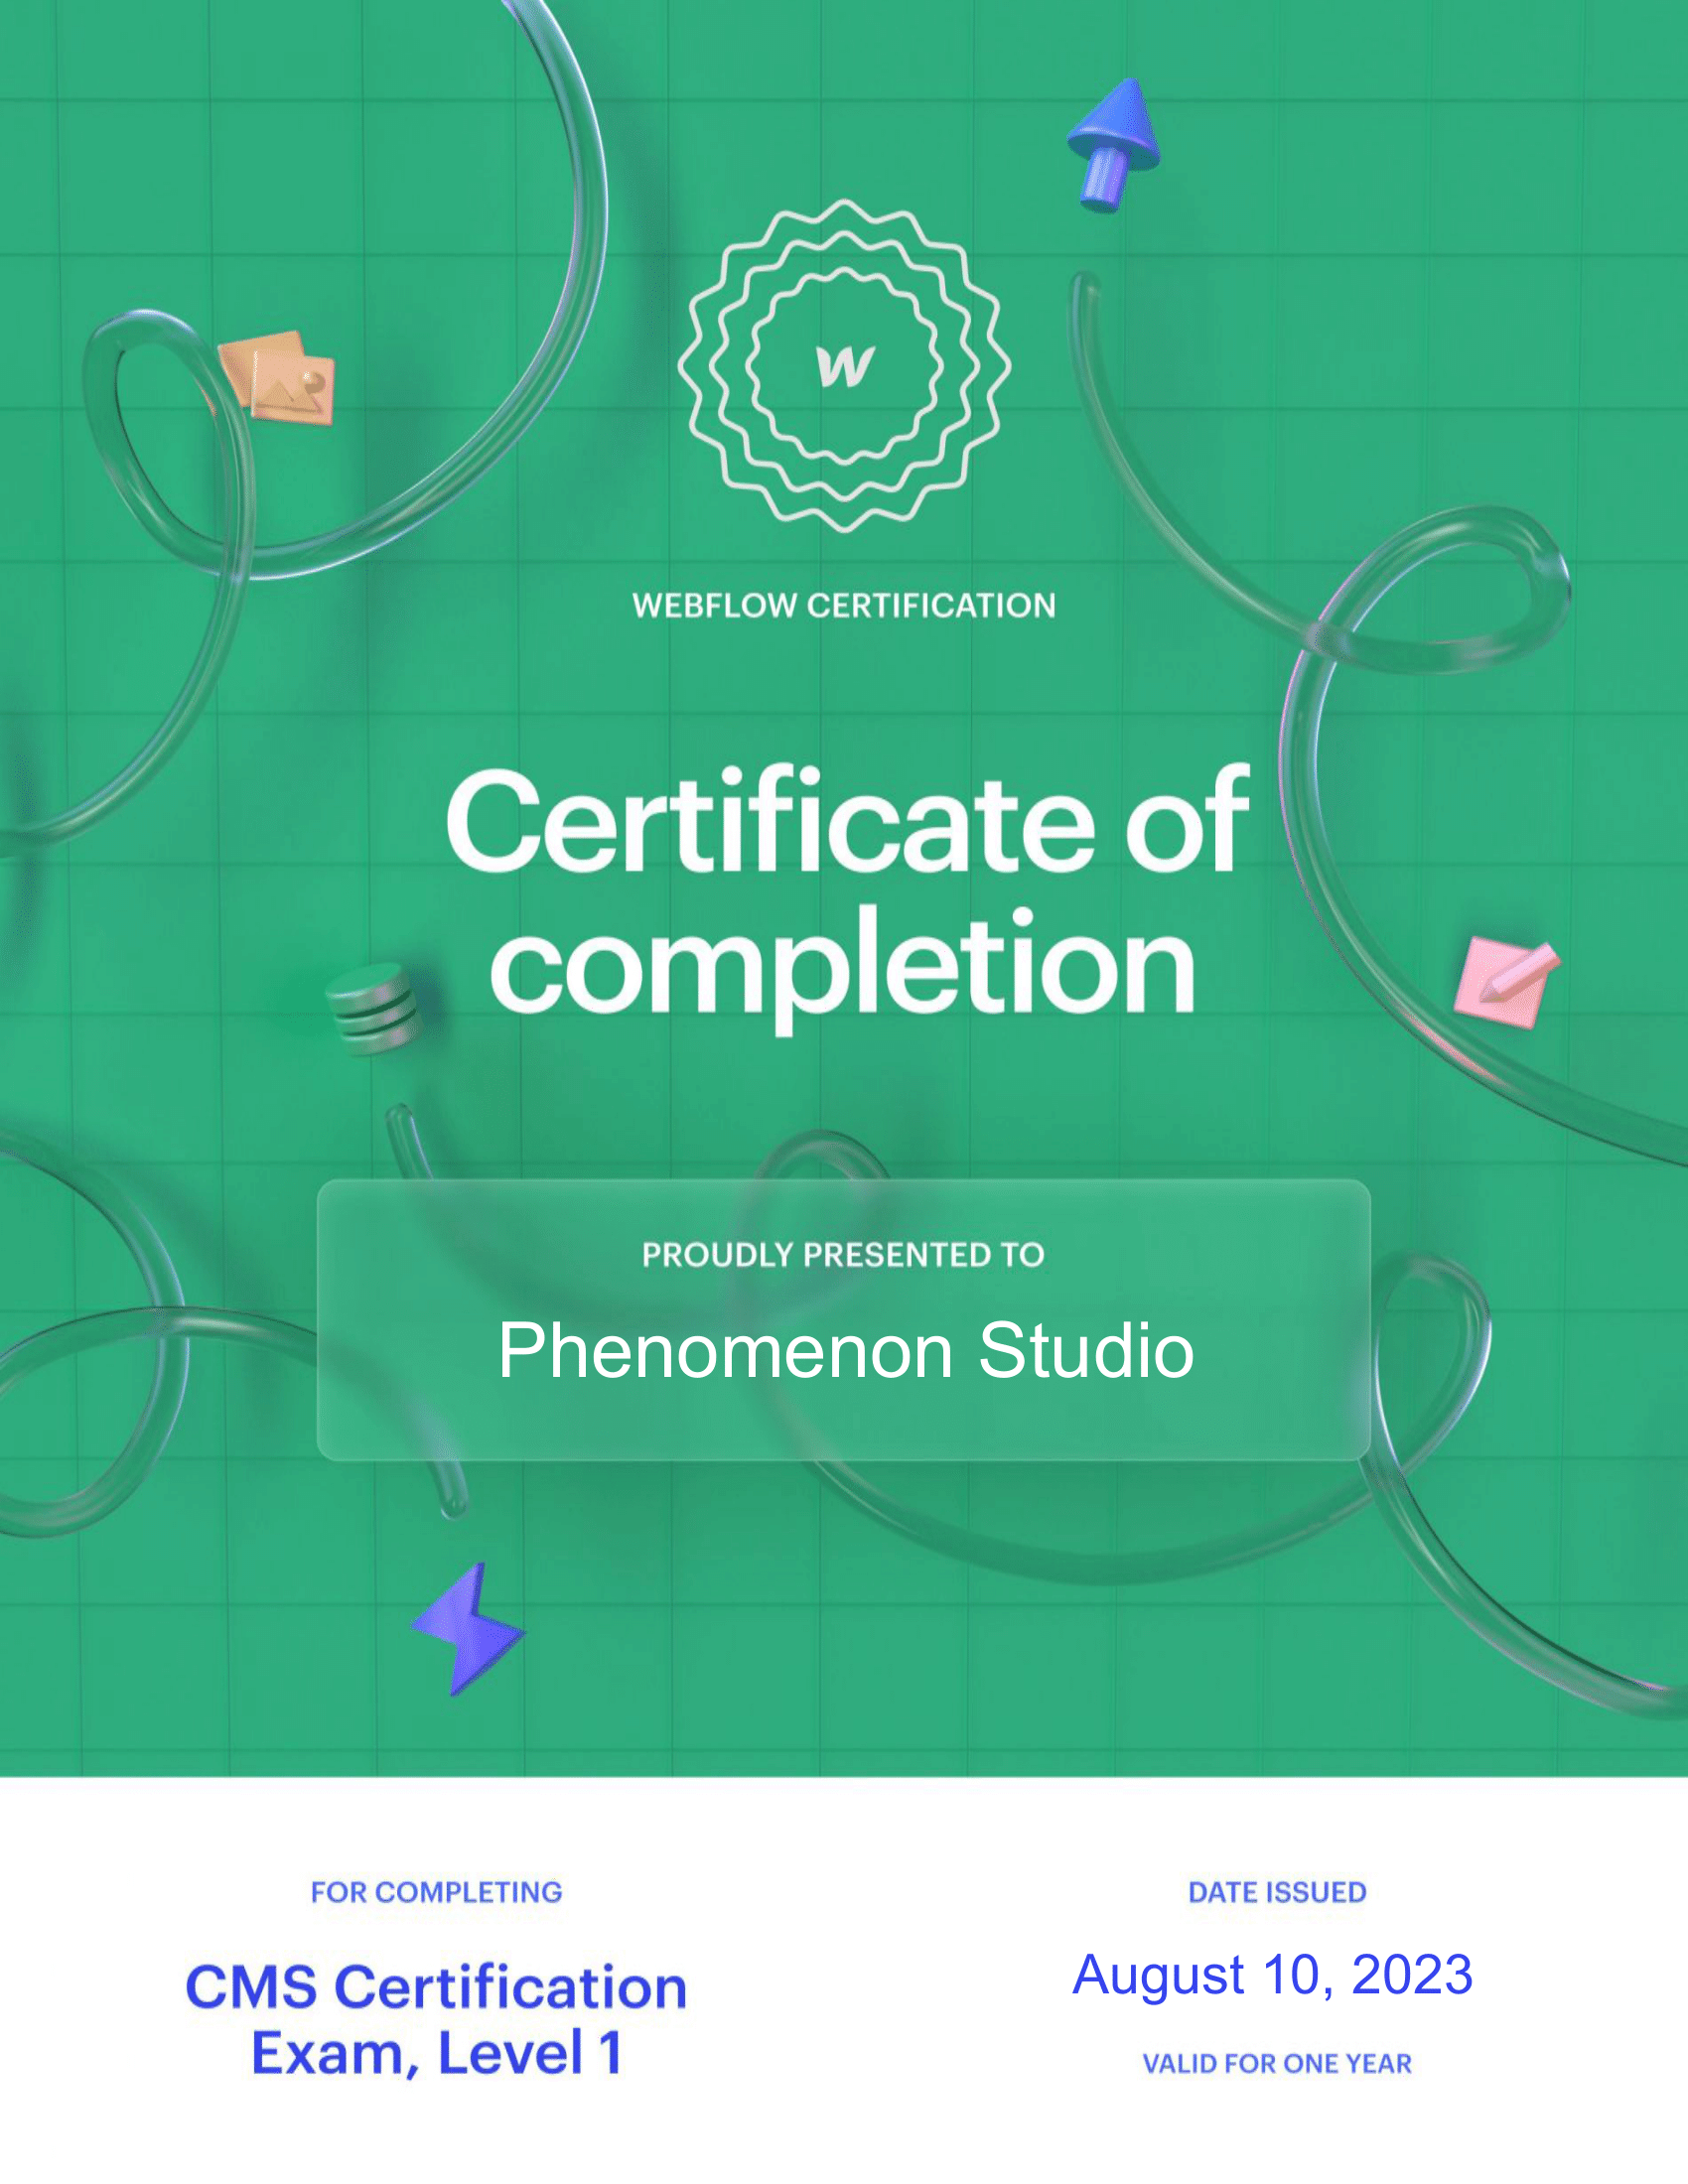 Phenomenon has received newly released Webflow certificates - Photo 3